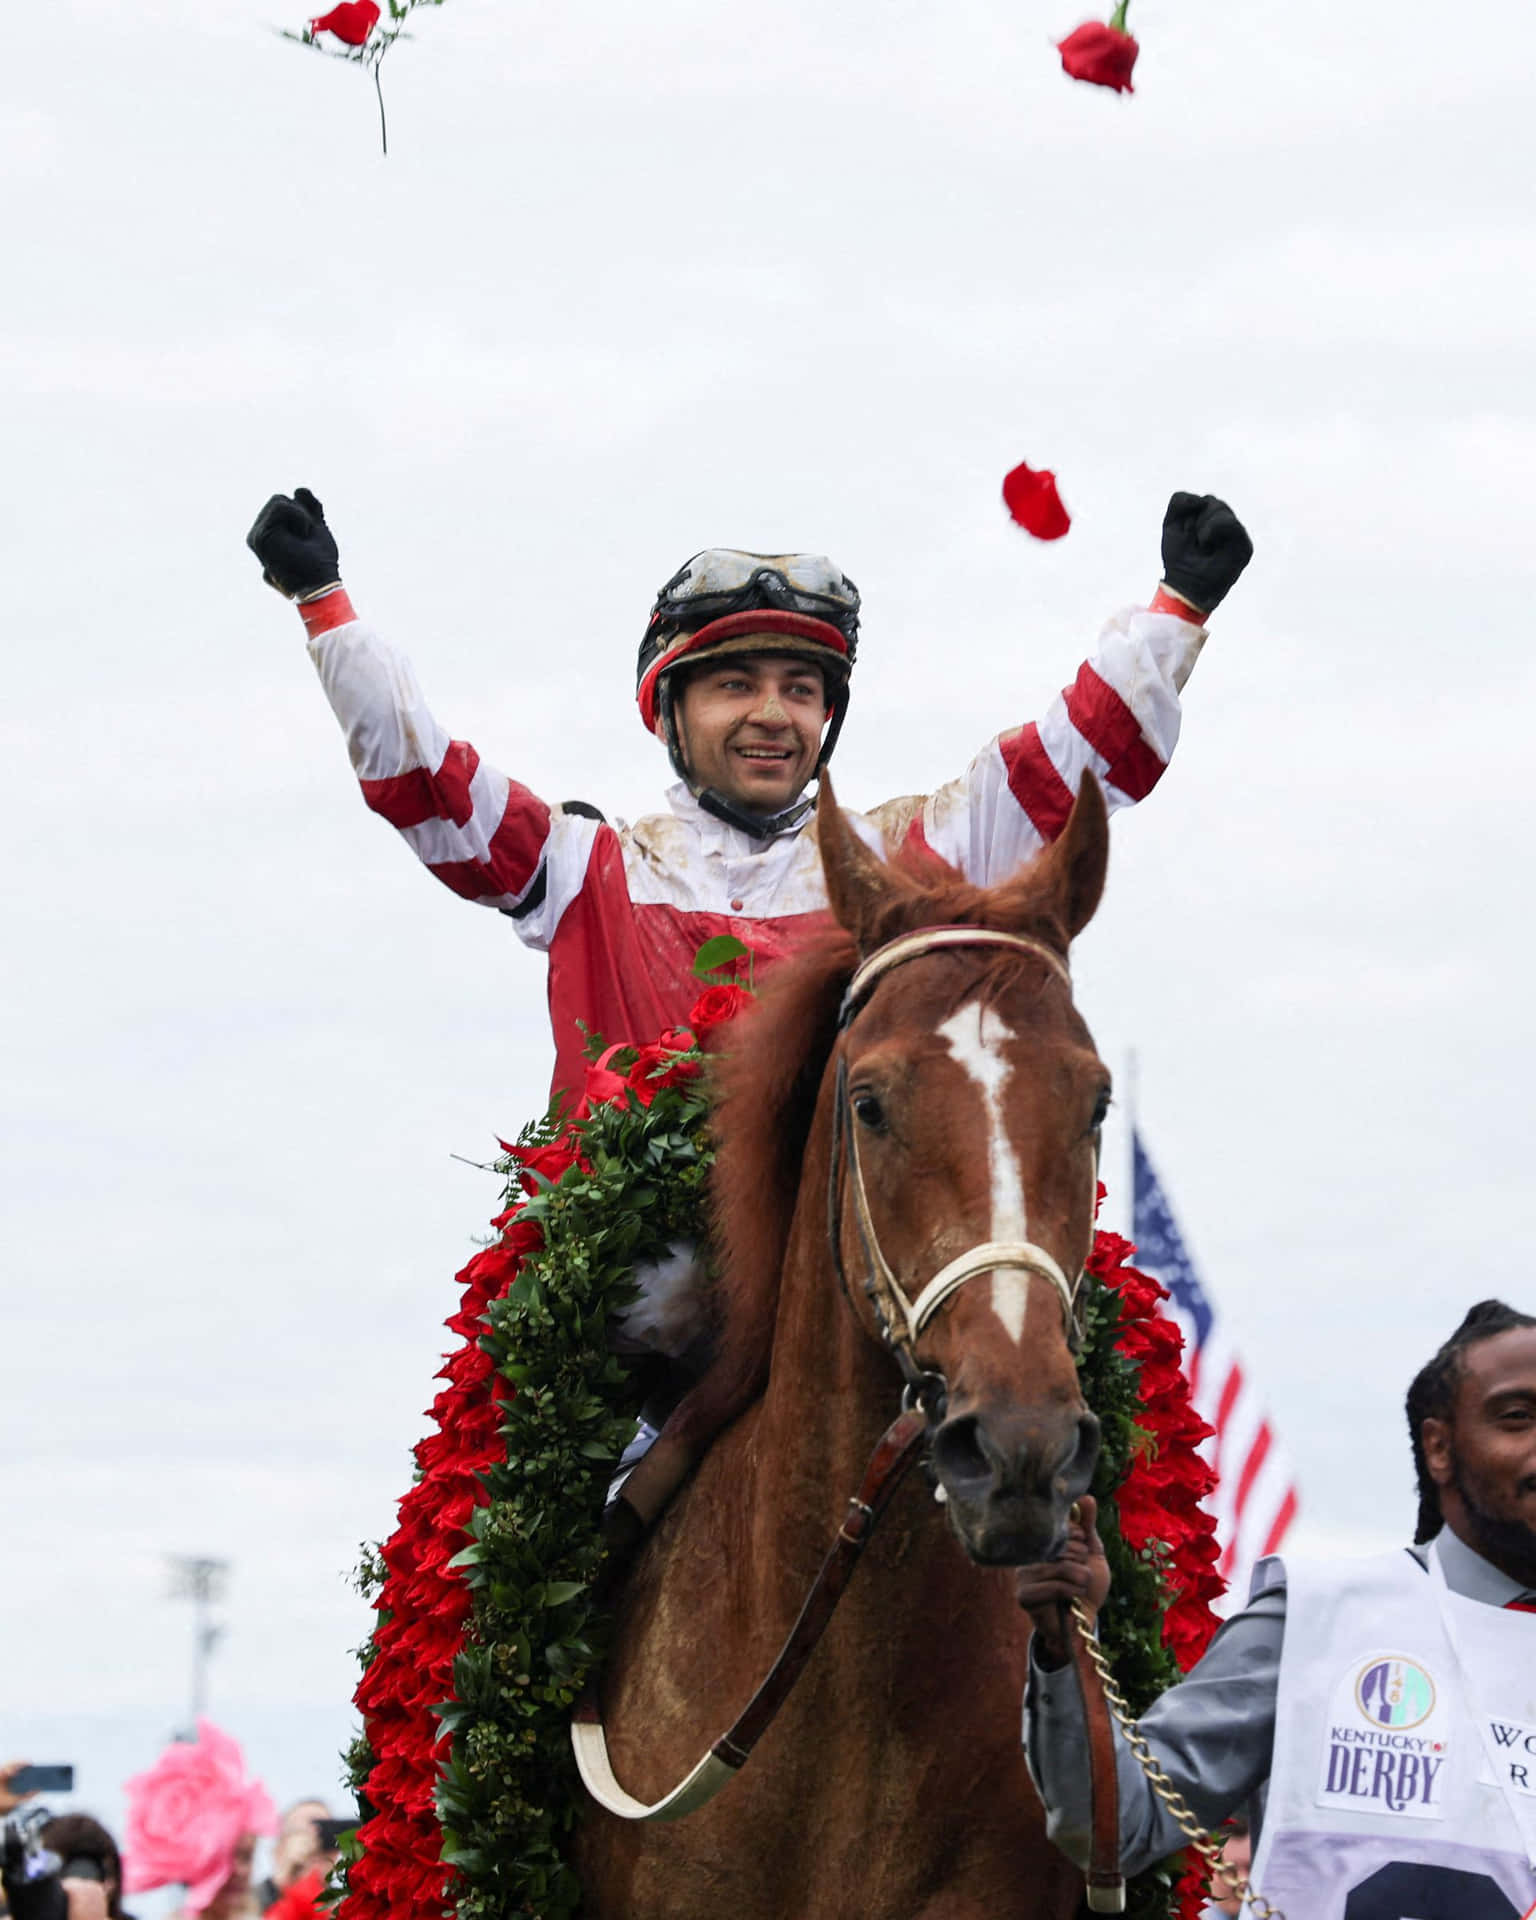 A Jockey On A Horse With Flowers On His Head